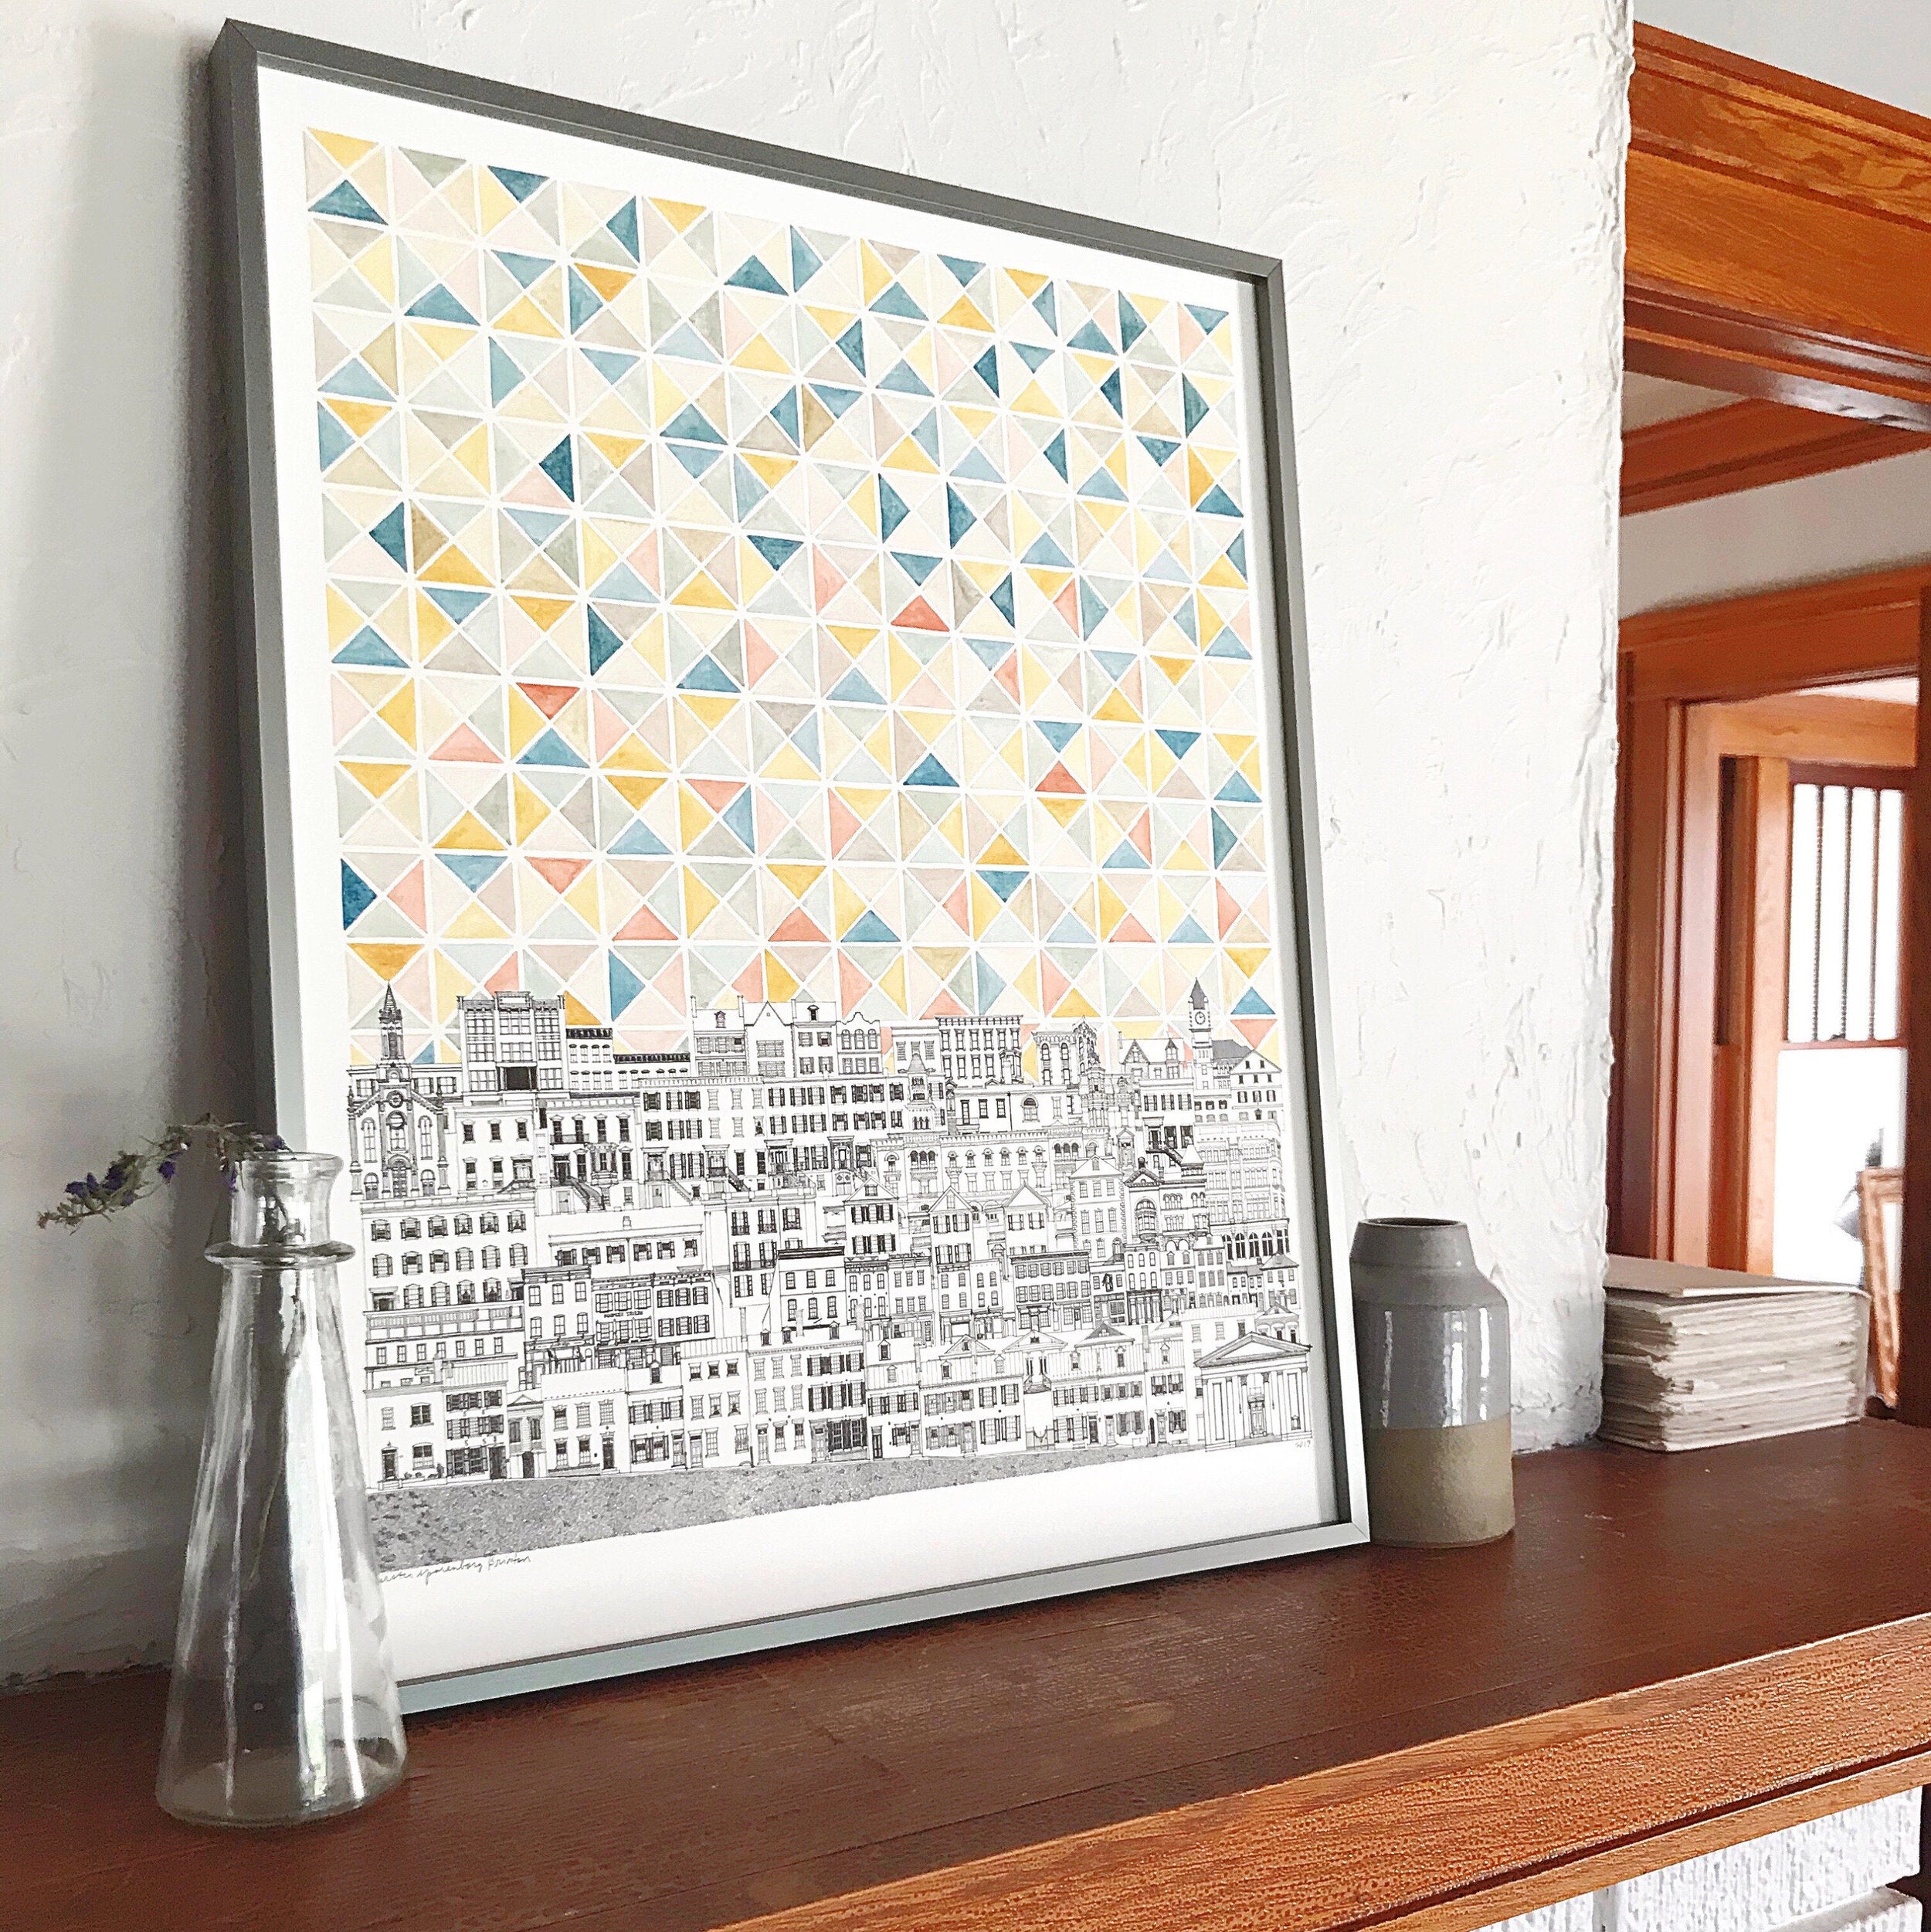 CityScape Architectural Drawing + Geometric Sky: ORIGINAL PAINTING (Commission)